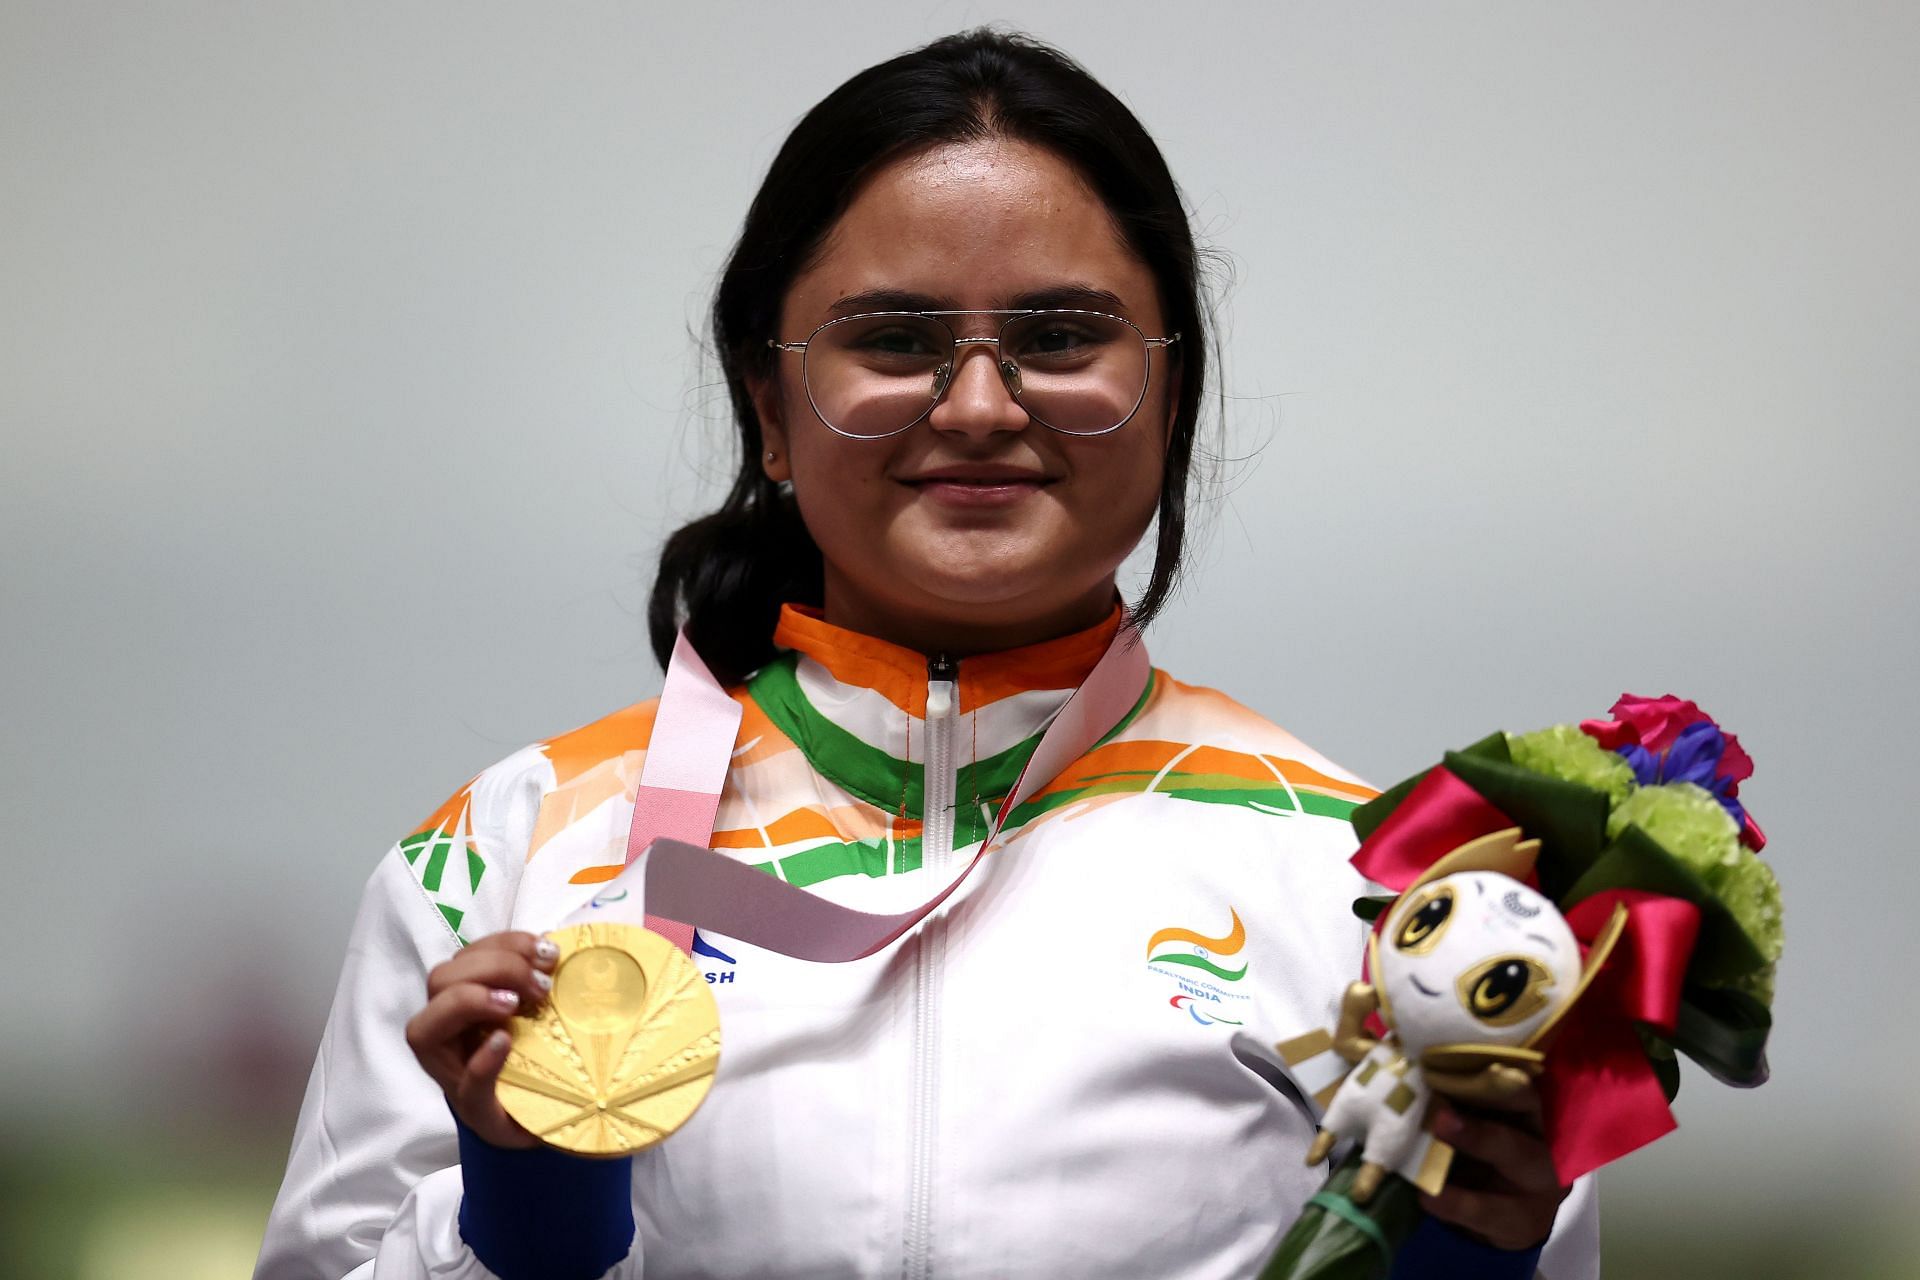 Avani Lekhara with her gold medal at the Tokyo Paralympics. (PC: Getty Images)